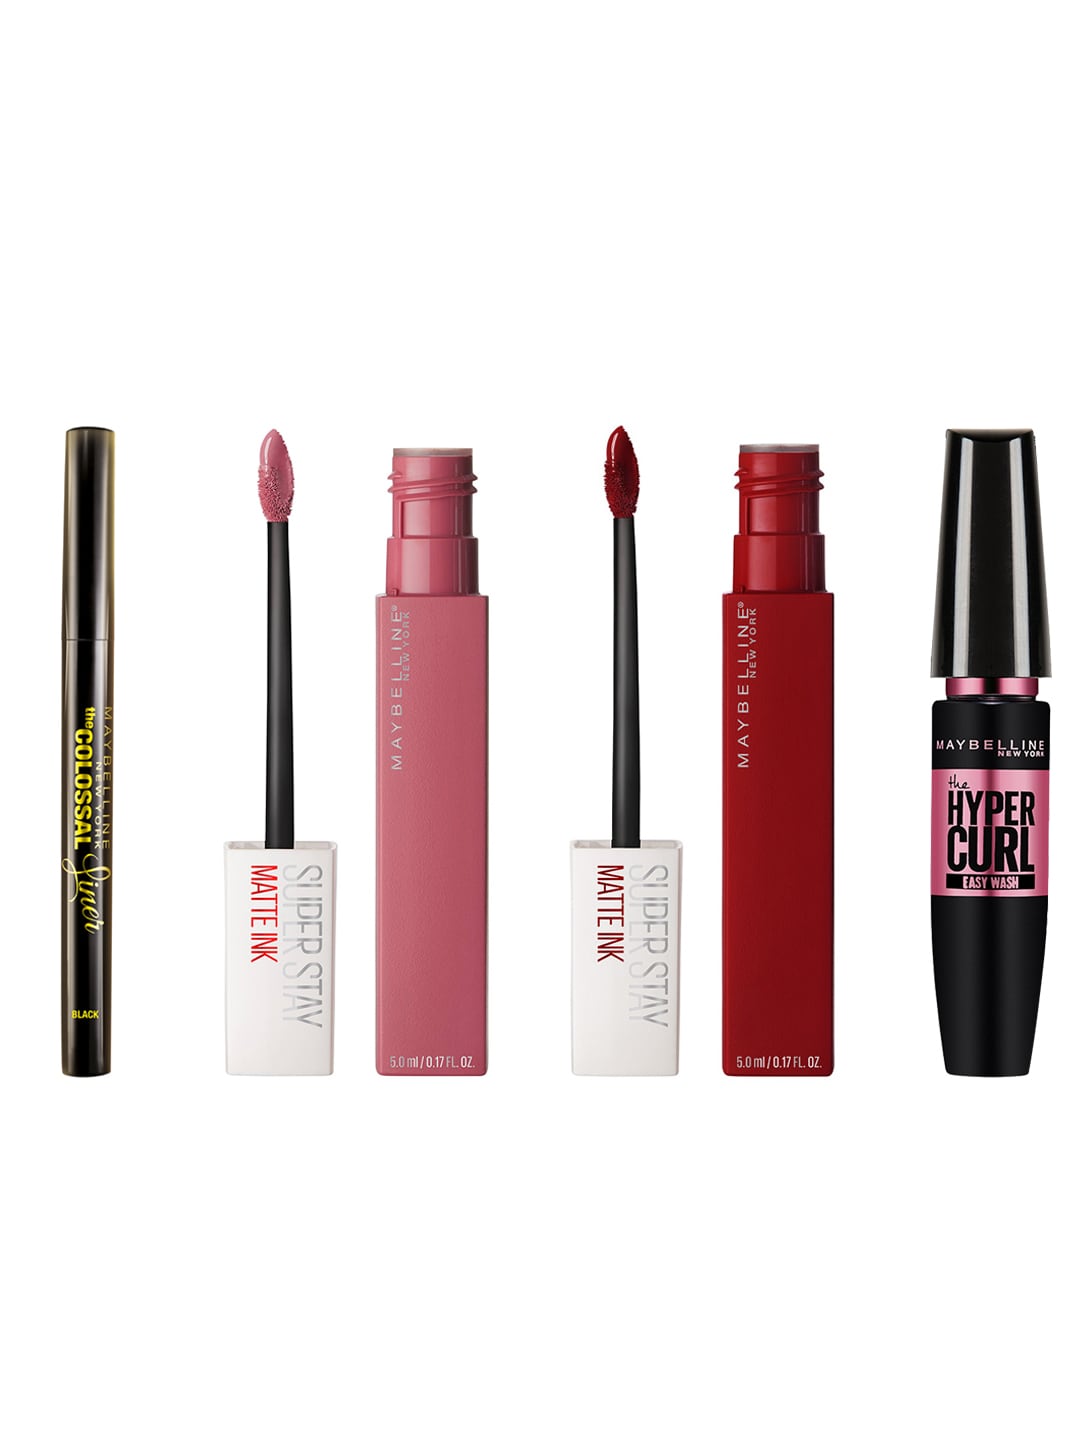 Maybelline New York Set Of Colossal Liner- Waterproof Mascara- Liquid Lipstick Price in India